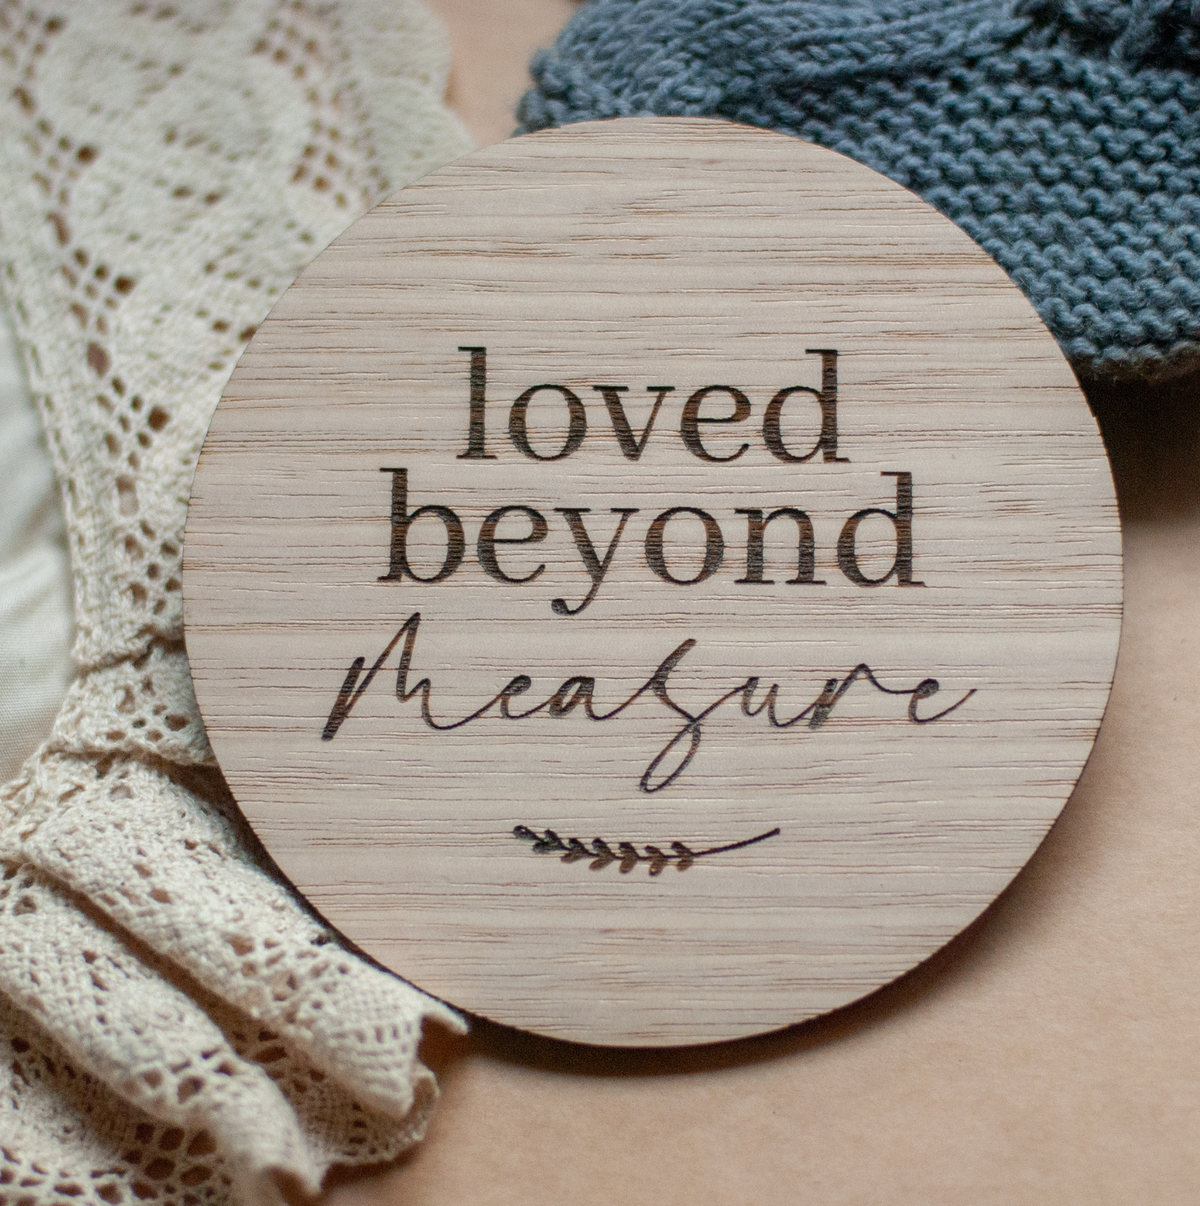 Loved beyonf measure timber birth or pregnancy announcement photos